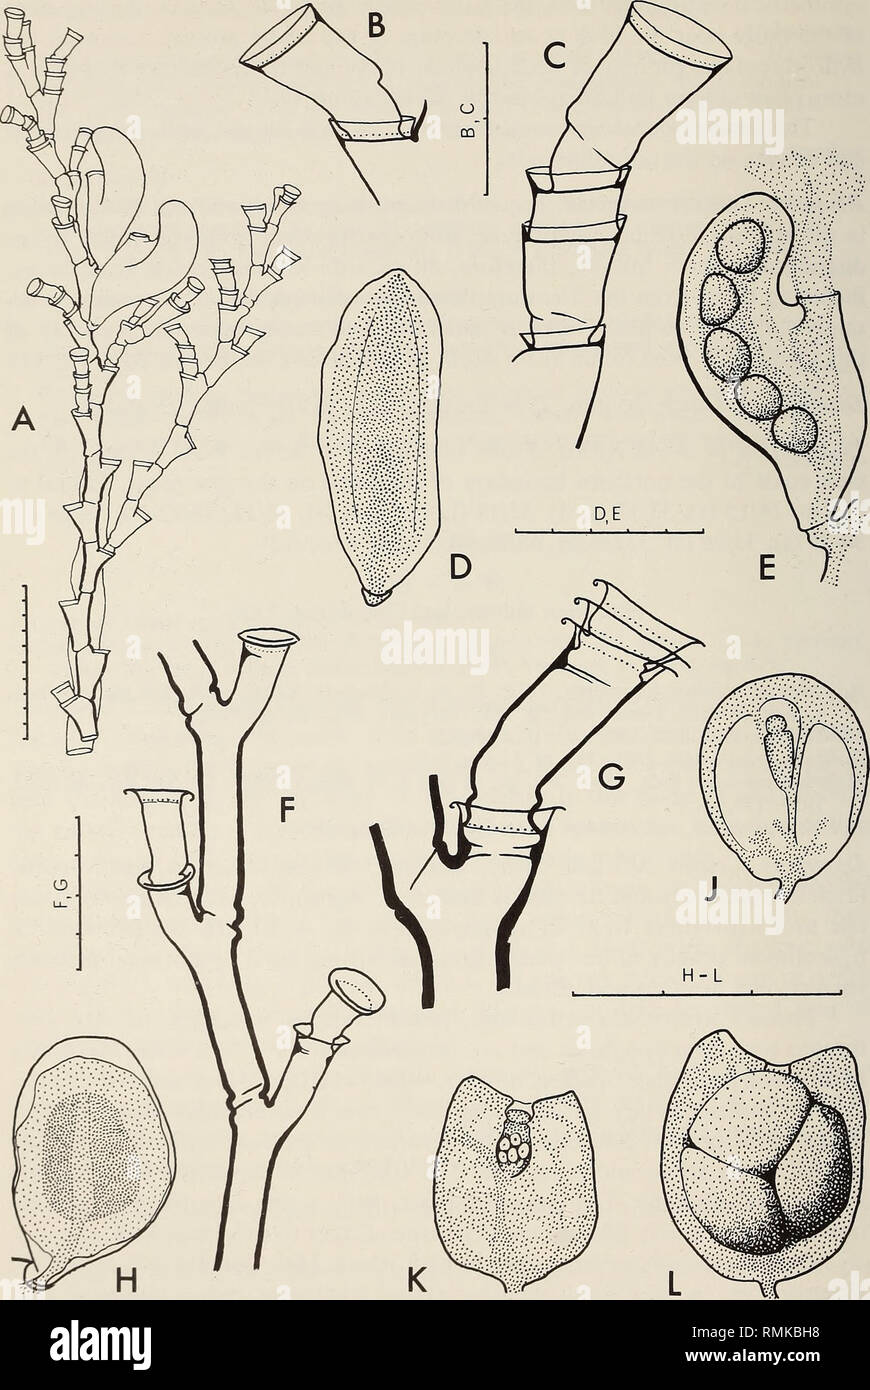 . Annals of the South African Museum = Annale van die Suid-Afrikaanse Museum. Natural history. 146 ANNALS OF THE SOUTH AFRICAN MUSEUM. Fig. 47. Halecium beanii. A, stem with female gonothecae: B and C, regenerated hydrothecae; D, male gonophore; E, female gonophore. Halecium delicatulum. F and G, parts of stem from small form (F) and large form (G); H, male gonophore; J-L, female gonophores, the first two showing hydranths, the third containing planulae. Scale: H-L in mm, the rest in mm/10.. Please note that these images are extracted from scanned page images that may have been digitally enhan Stock Photo